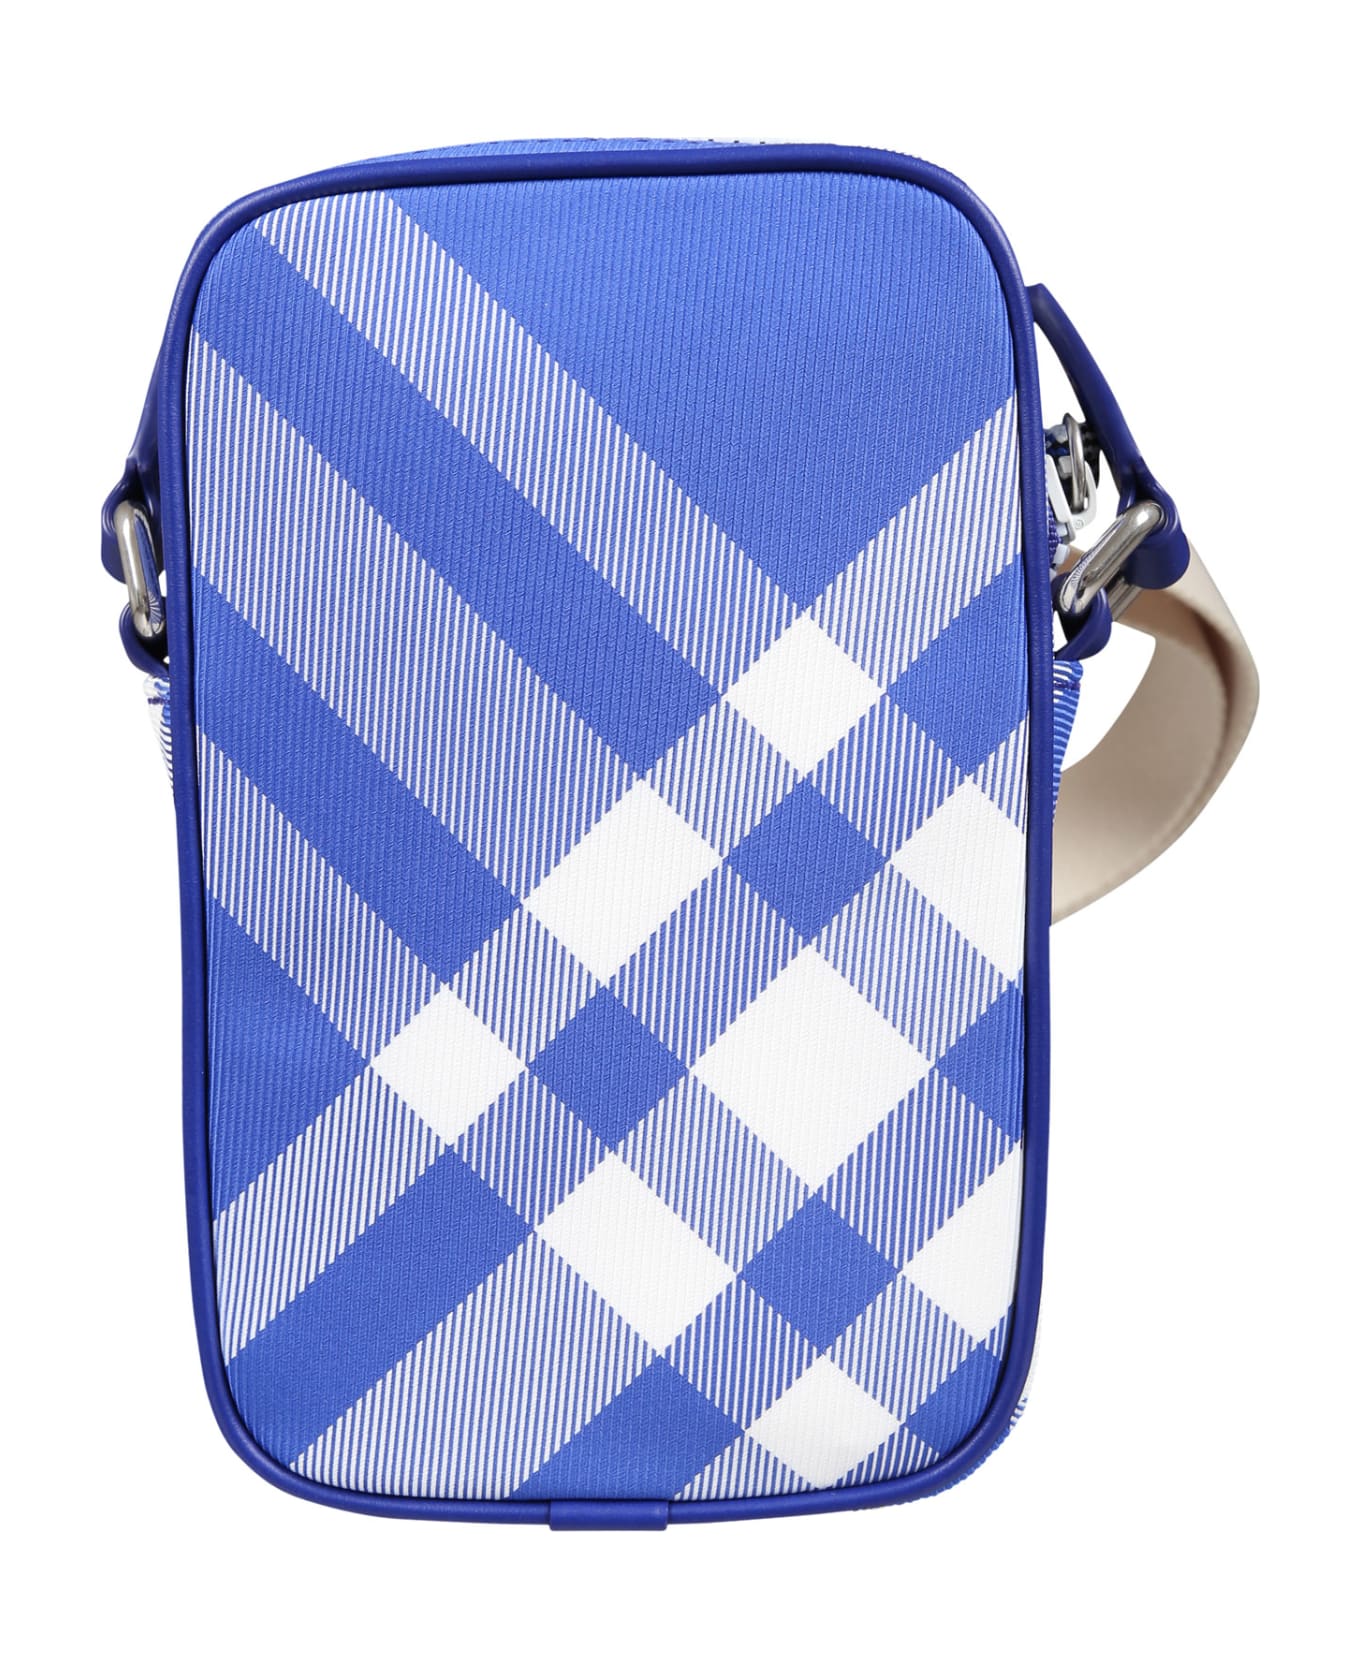 Burberry Blue Bag For Kids With Check - Blue